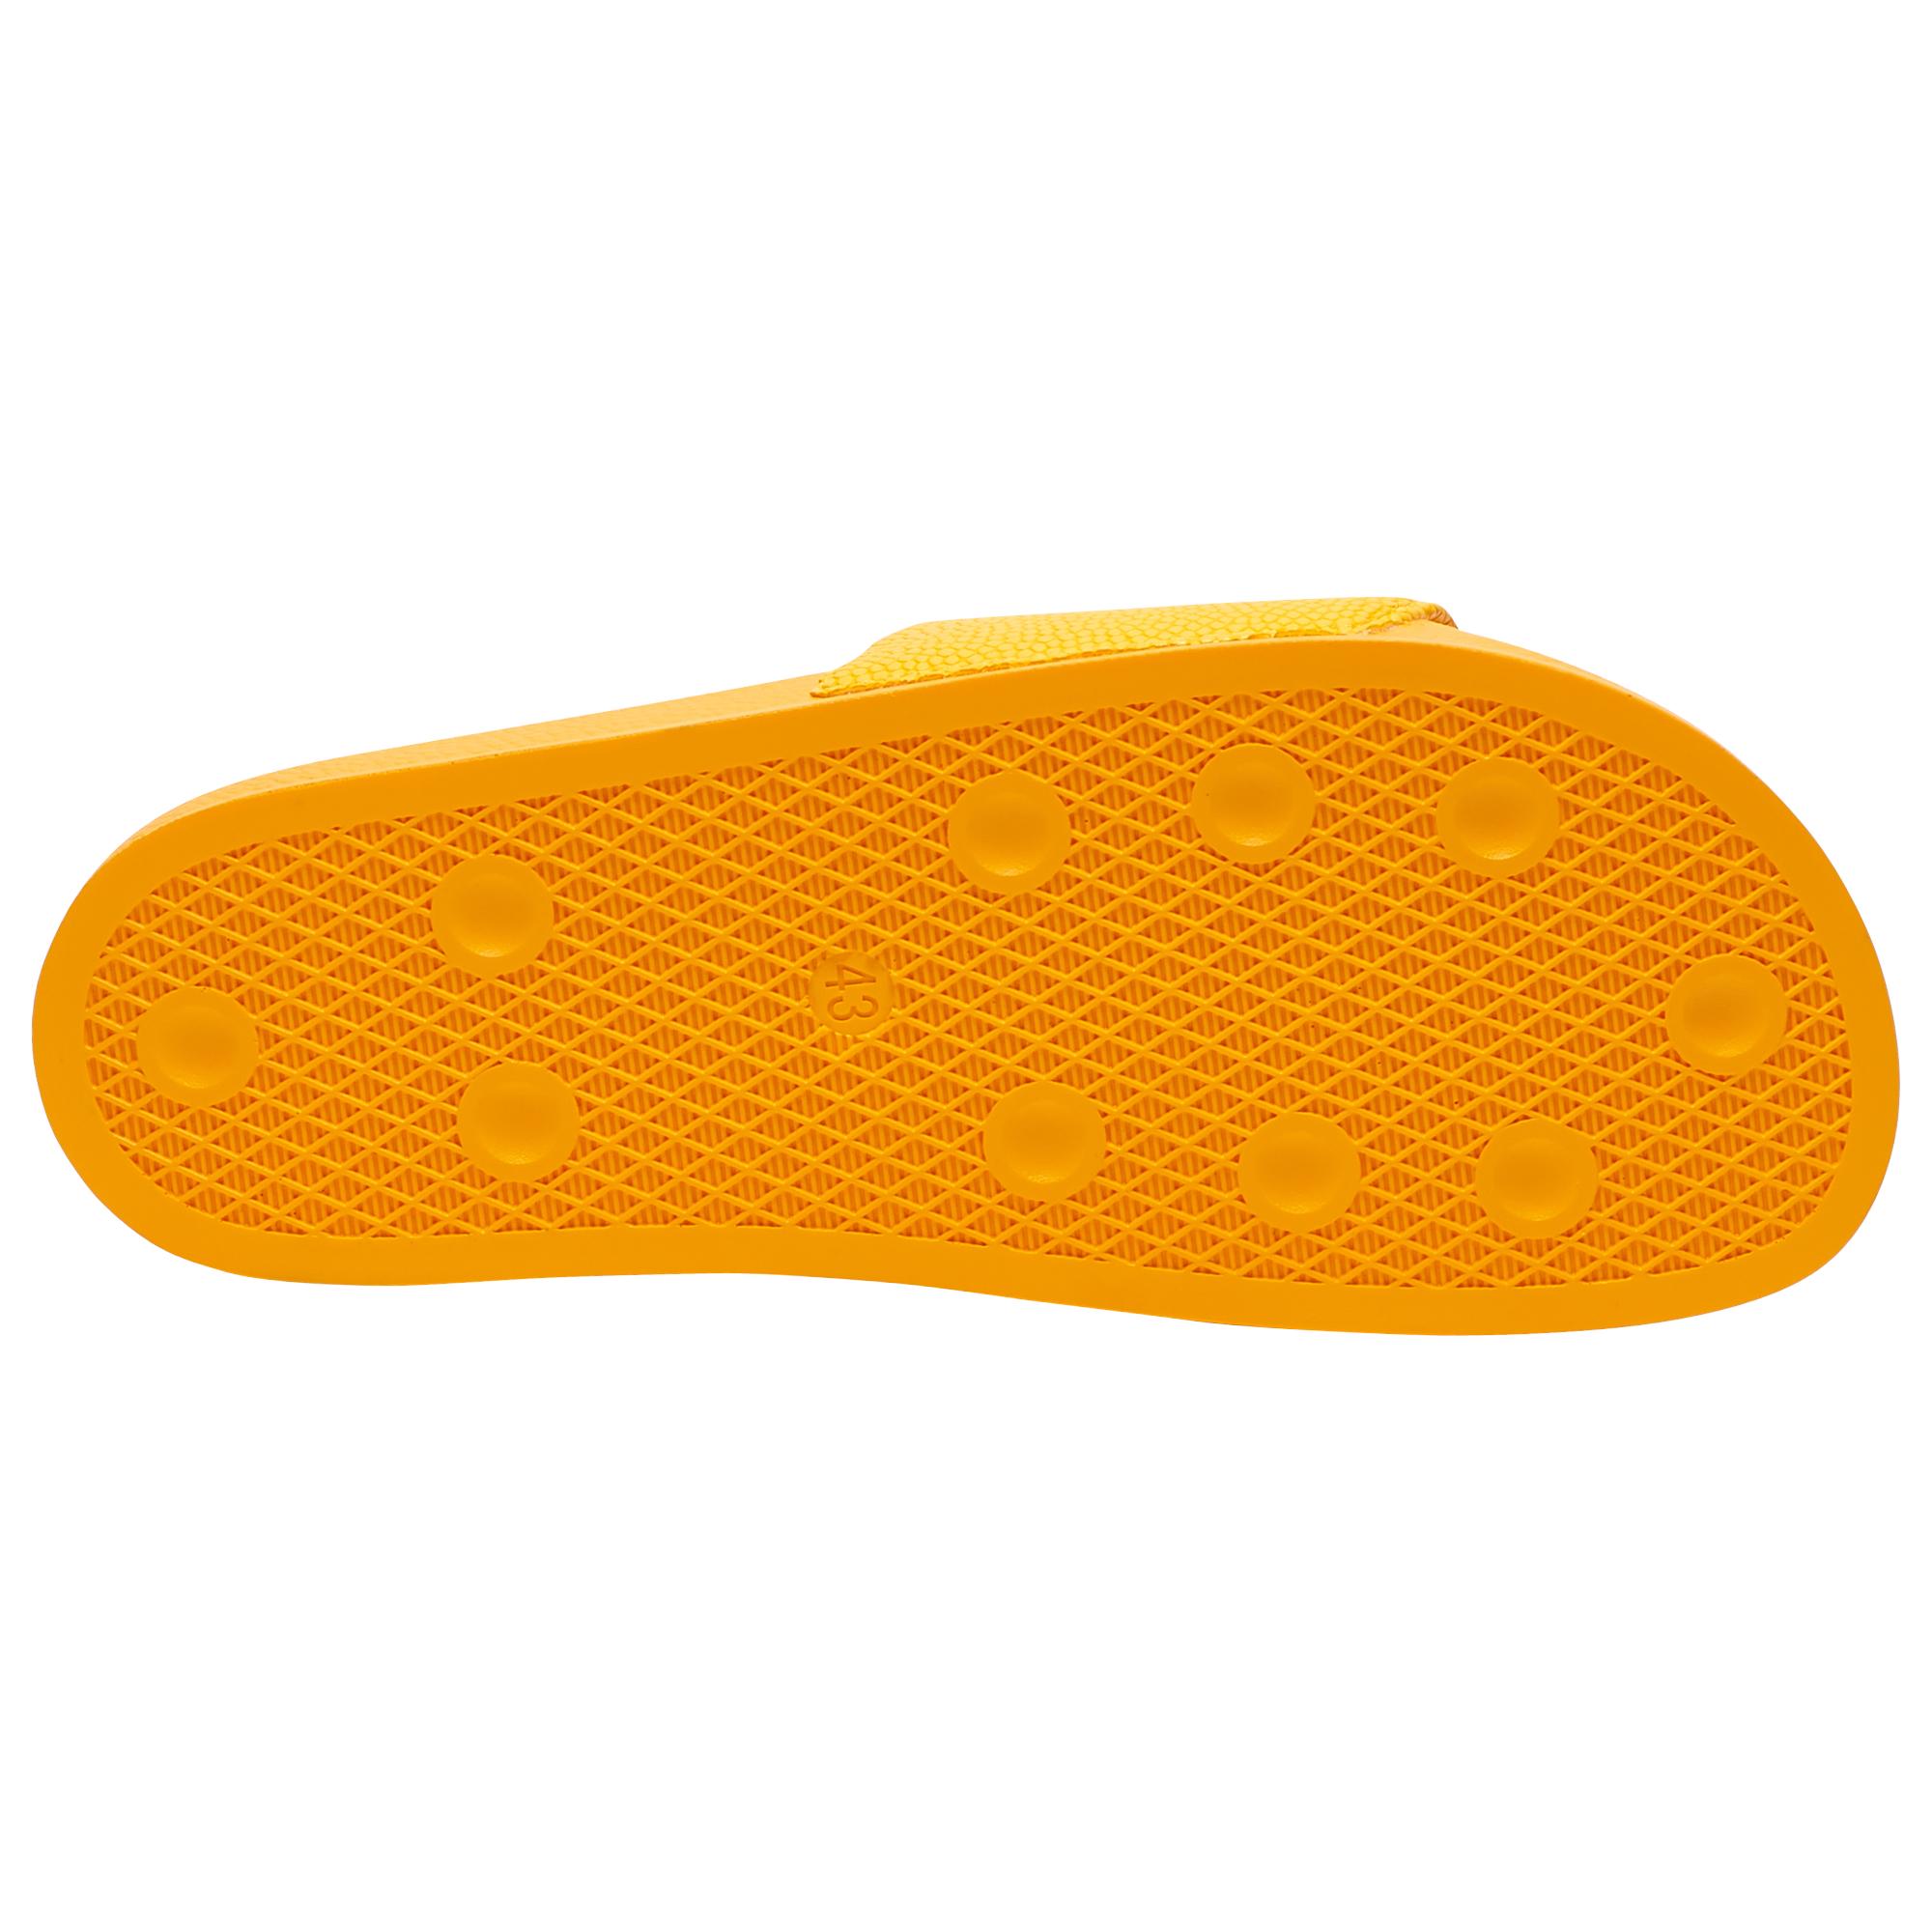 Chinatown Market Smiley Slide - Shoes in Yellow/Yellow (Yellow 